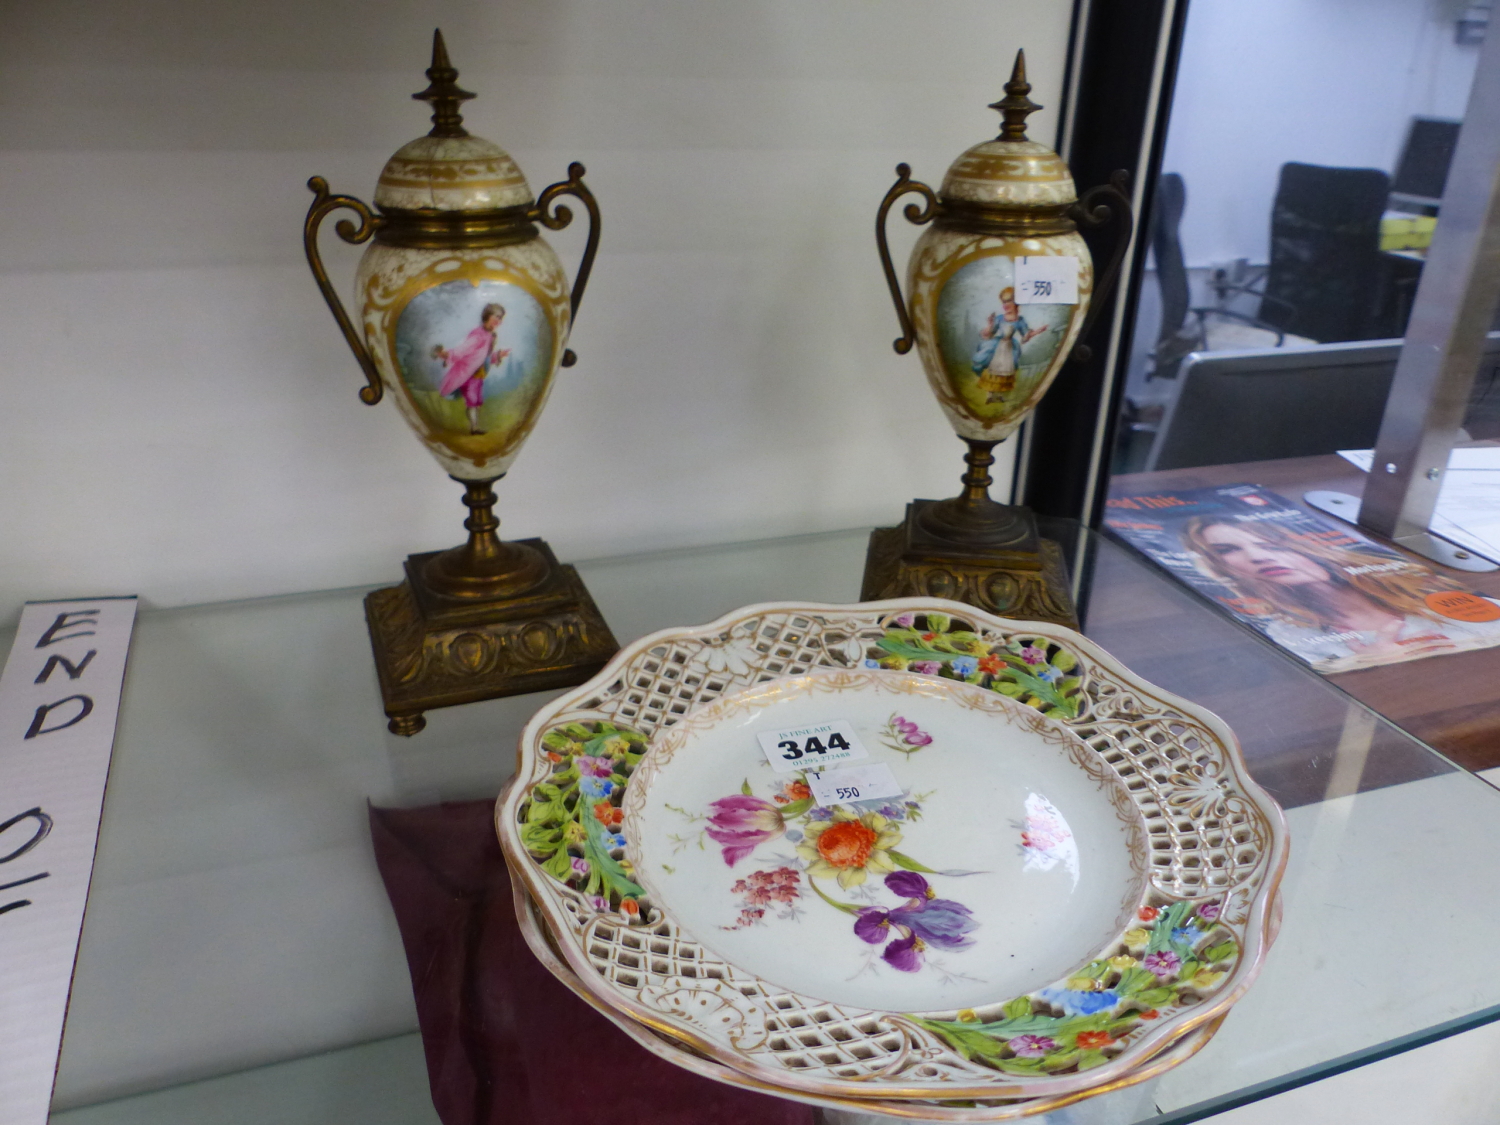 A PAIR OF ORMOLU HANDLED OVOID PORCELAIN SIDE PIECES PAINTED WITH 18th C. FIGURES TOGETHER WITH A